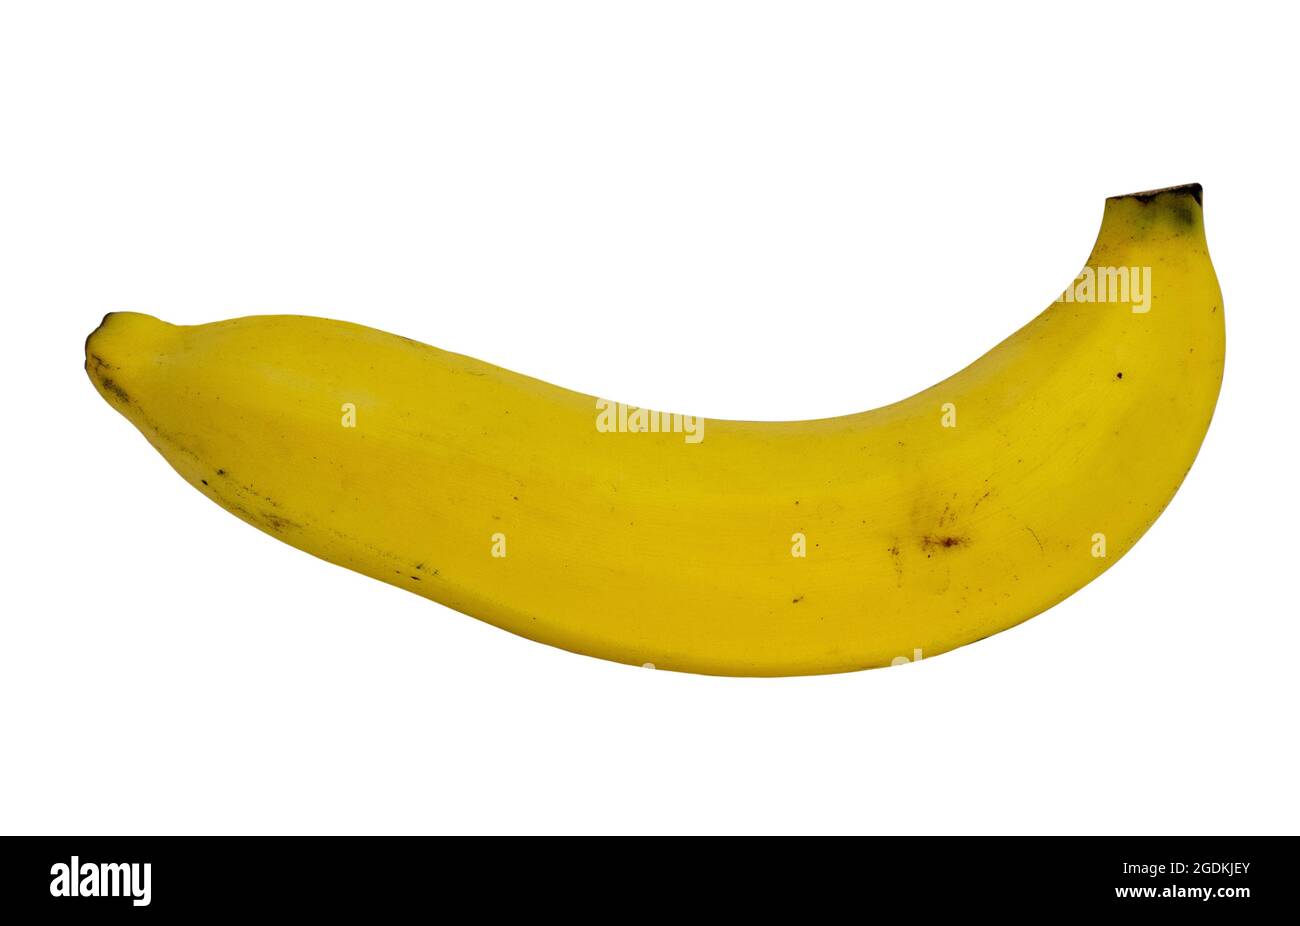 Ripe, yellow bananas with sweet flavor for a healthy snack. Clipping path. Stock Photo